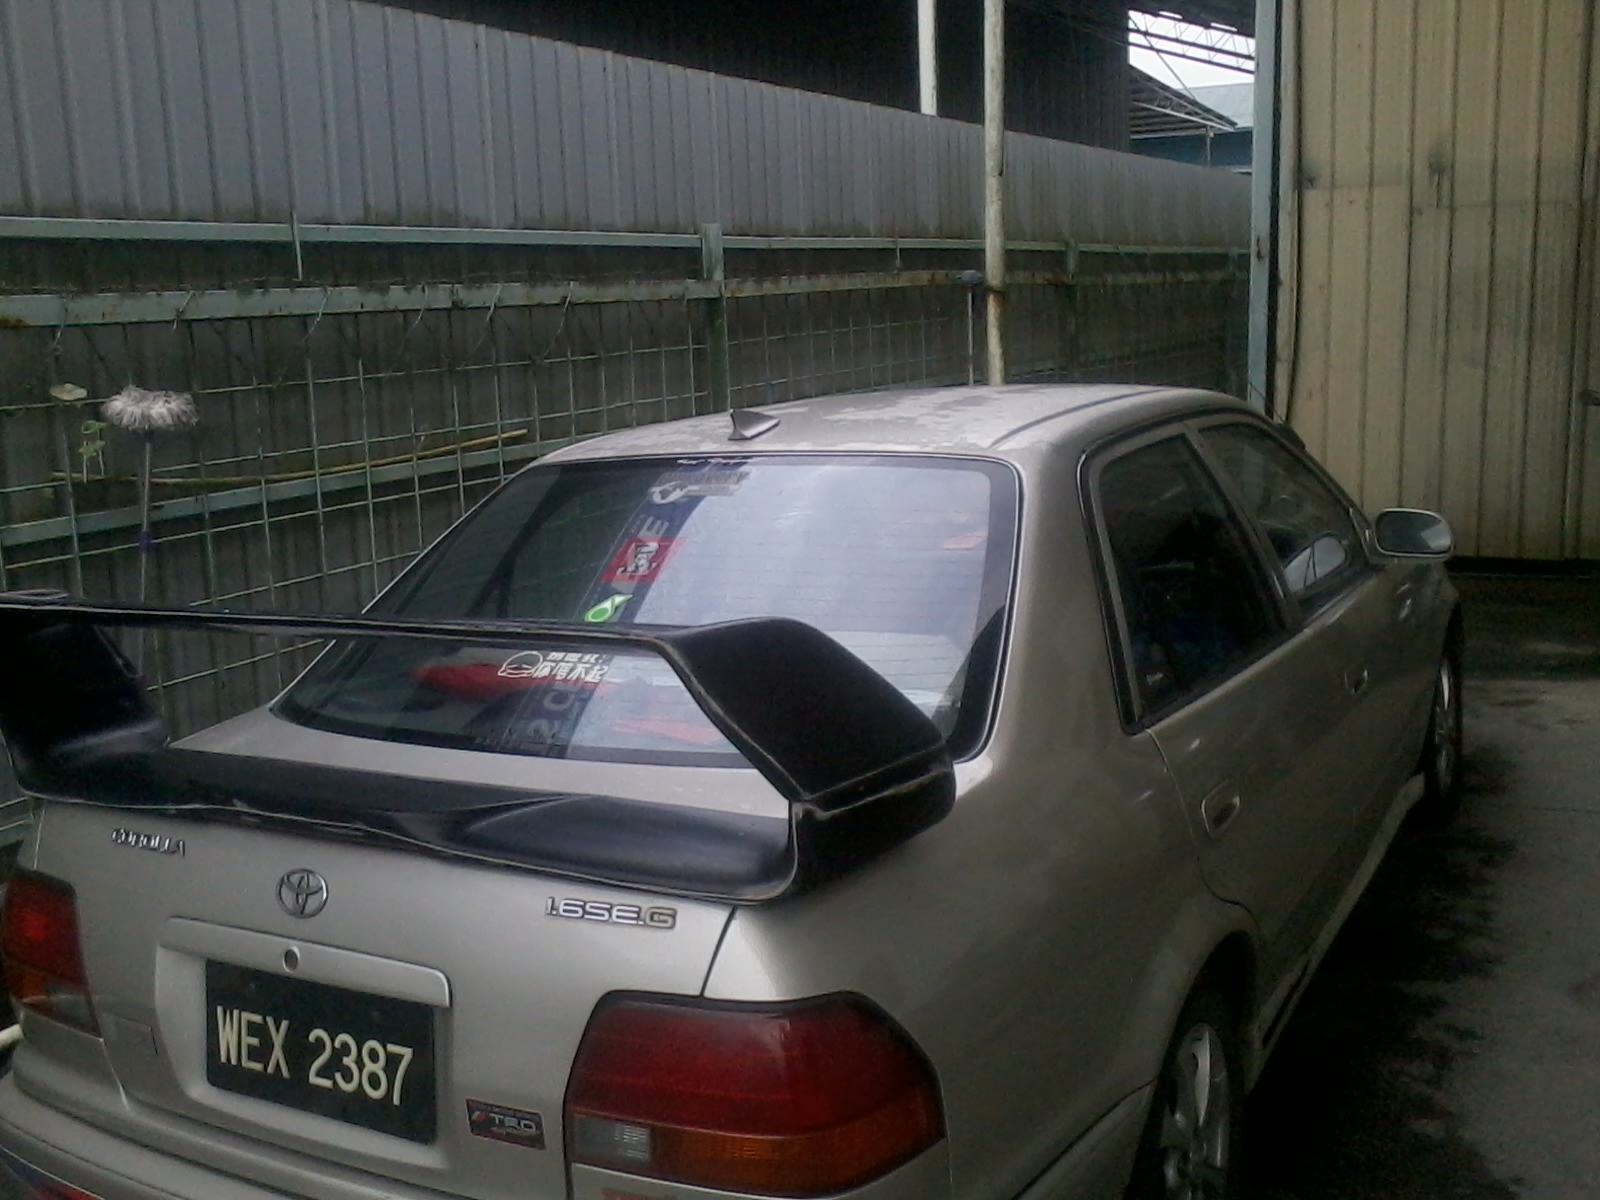 FOR THE BACK I USED THE REPLICA GC8 SUBARU SPOILER BECAUSE THE ...